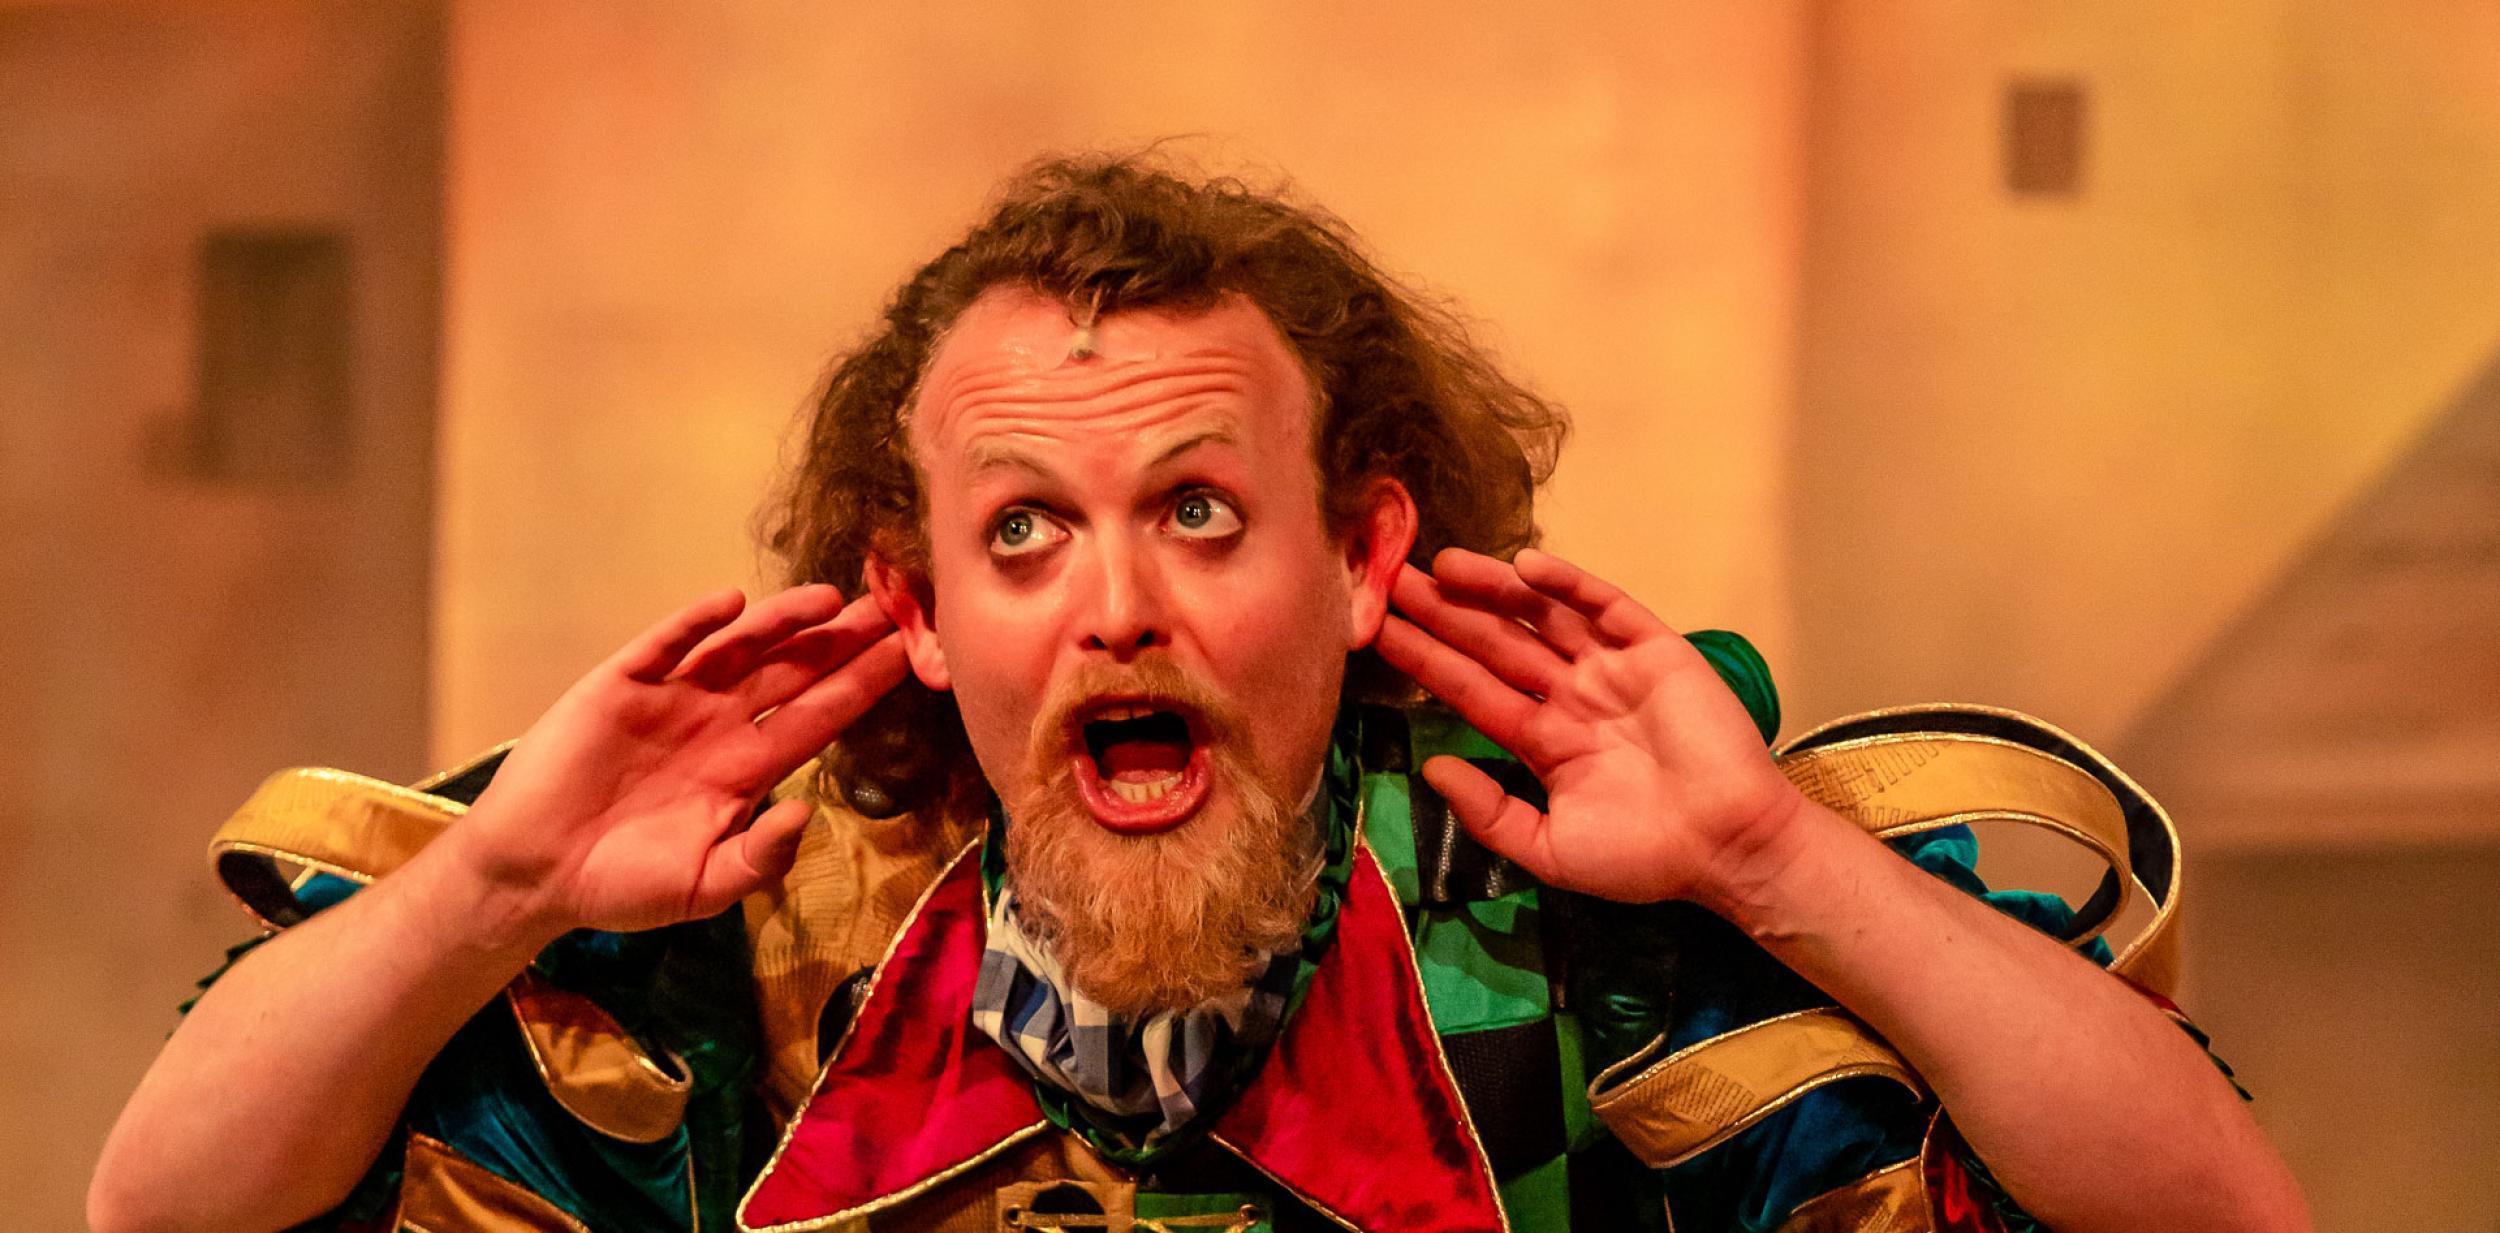 panto character holding his fingers behind his ears